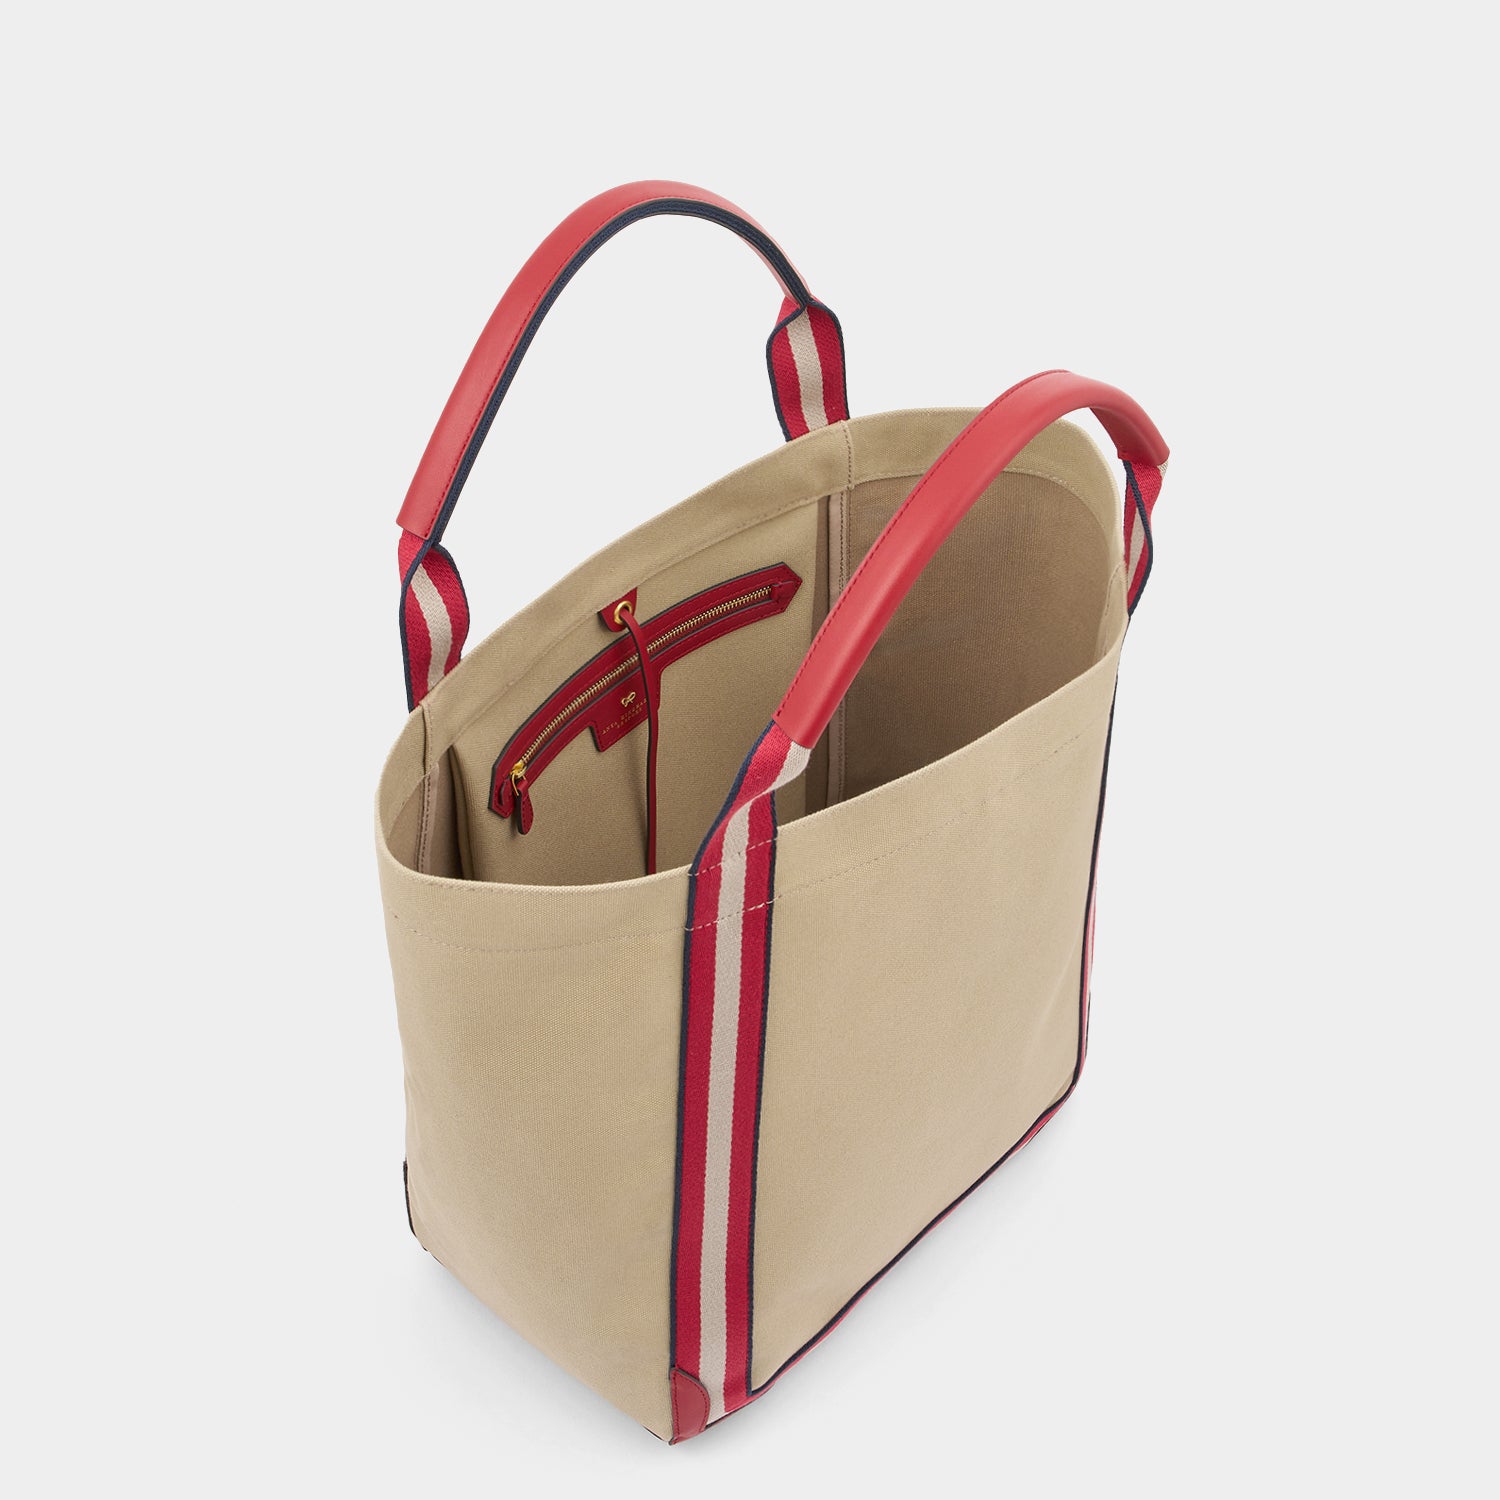 Bespoke Walton Pont Tote -

                  
                    Circus Leather in Red -
                  

                  Anya Hindmarch UK
